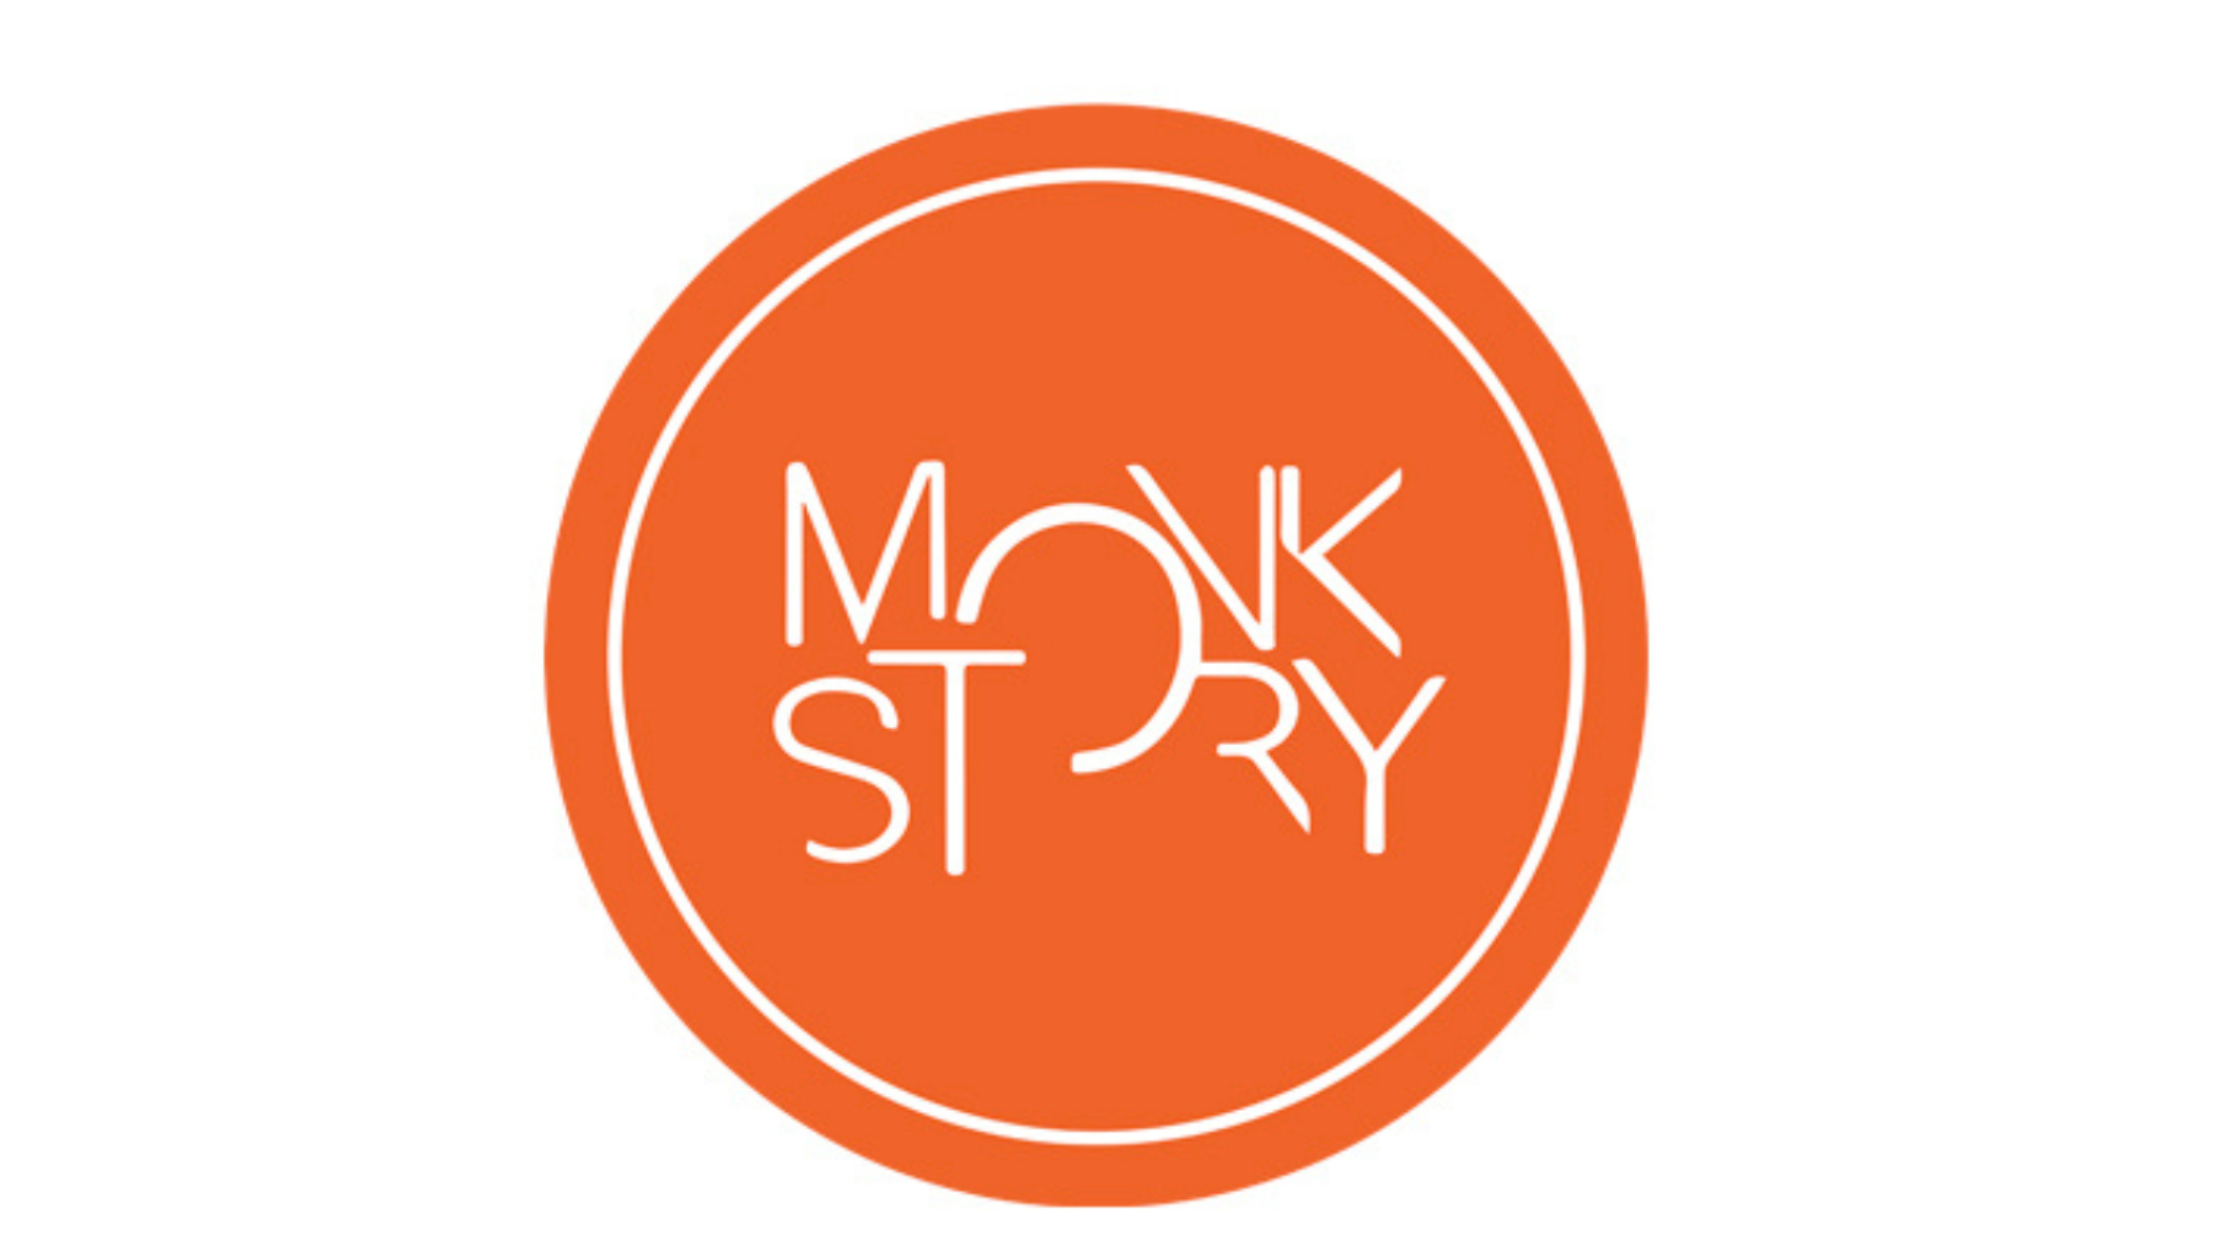 Monk Story - The Adventure Behind The Brand